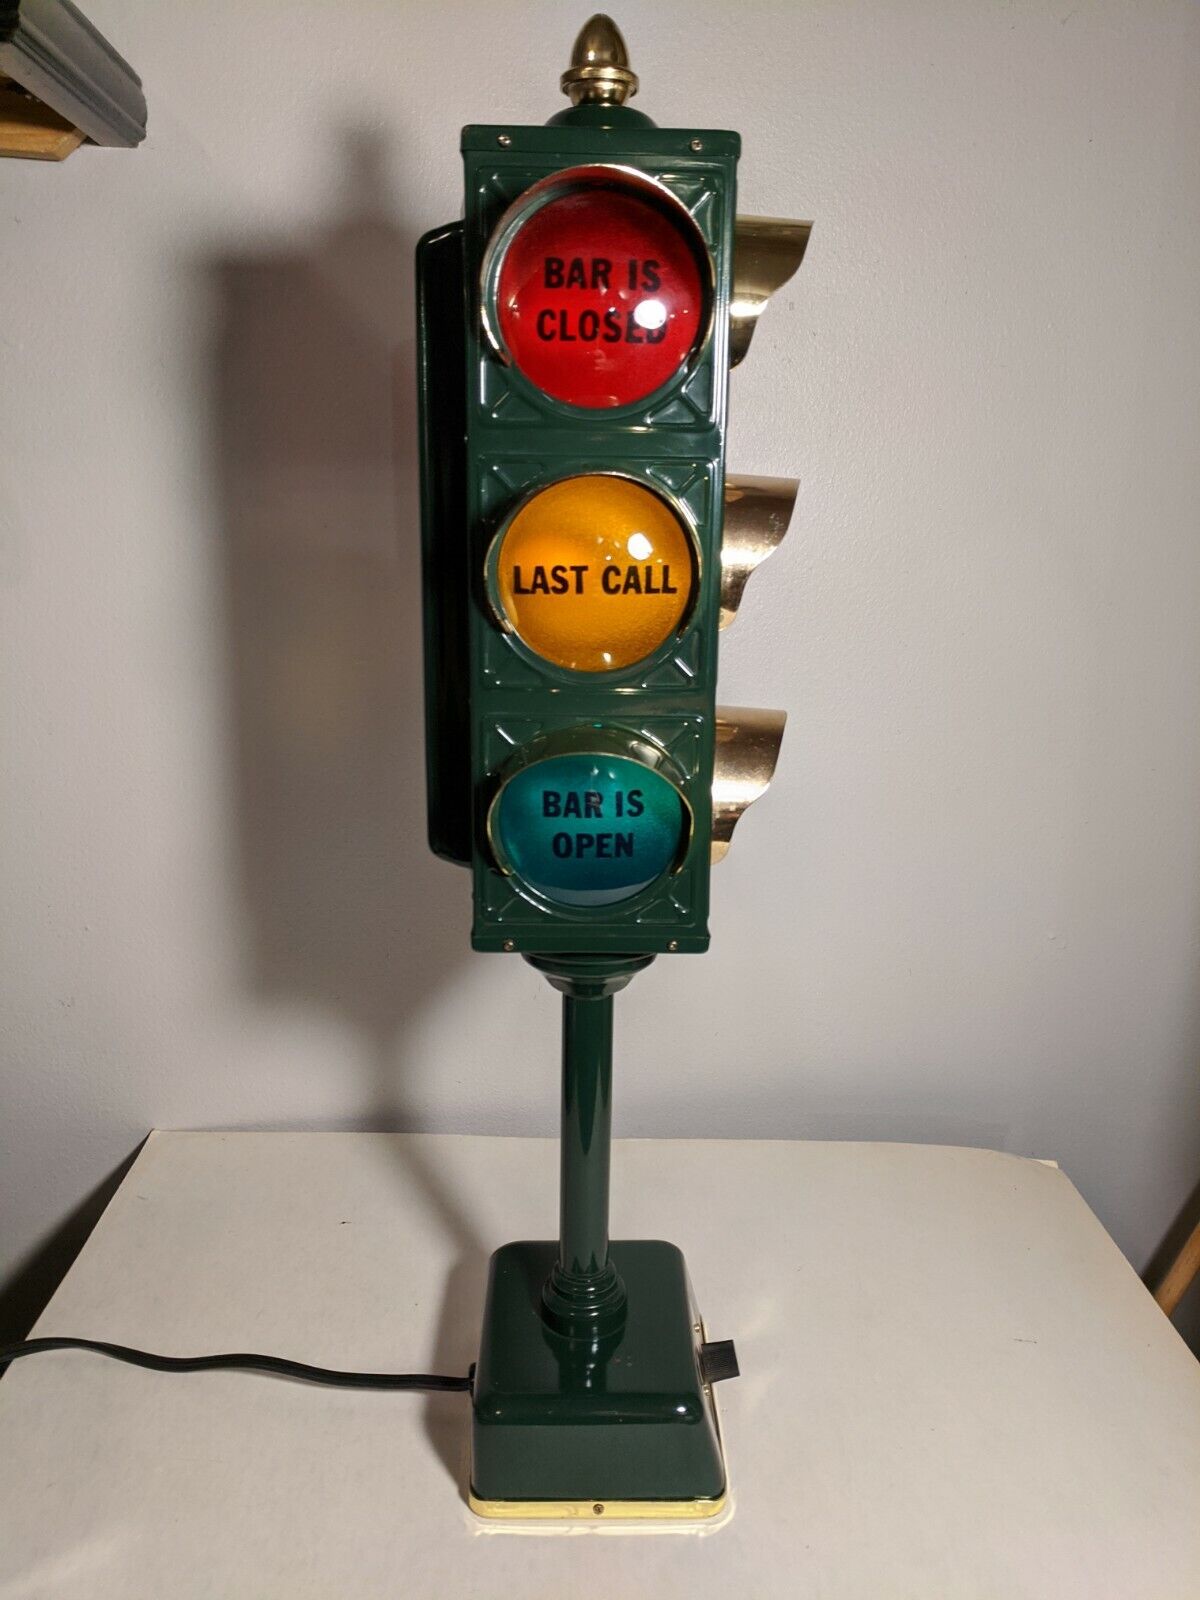 Vintage 1960s B&B Bar Lamp Stop Light Traffic Signal Open Closed Last Call  WORKS for Sale - Celebrity Cars Blog